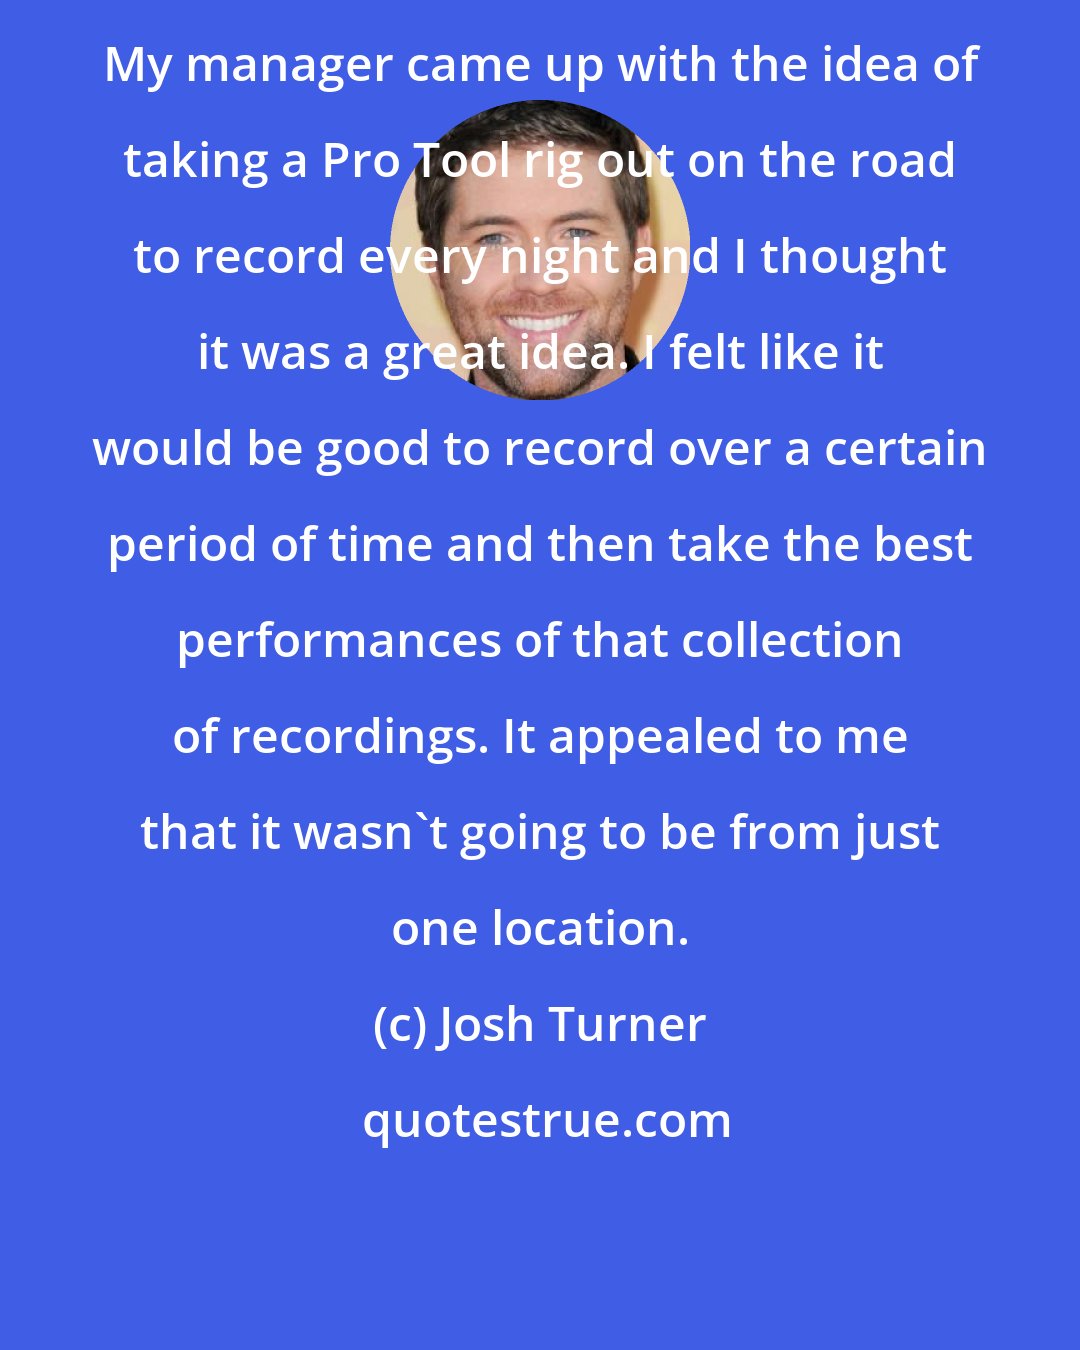 Josh Turner: My manager came up with the idea of taking a Pro Tool rig out on the road to record every night and I thought it was a great idea. I felt like it would be good to record over a certain period of time and then take the best performances of that collection of recordings. It appealed to me that it wasn't going to be from just one location.